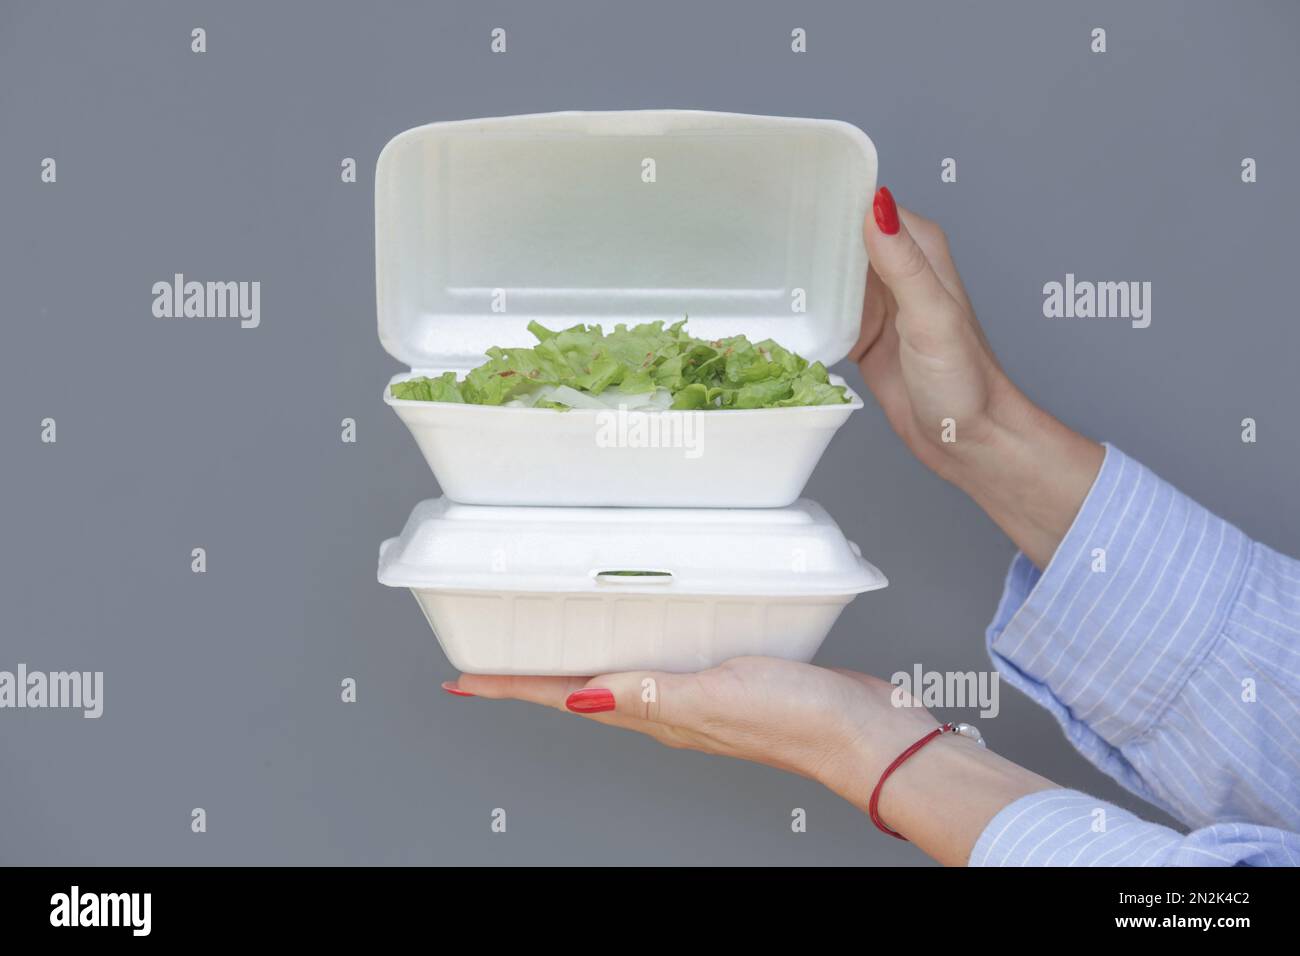 Healthy Greek Salad In Plastic Package For Take Away Or Food Delivery On A  White Marble Background Stock Photo - Download Image Now - iStock